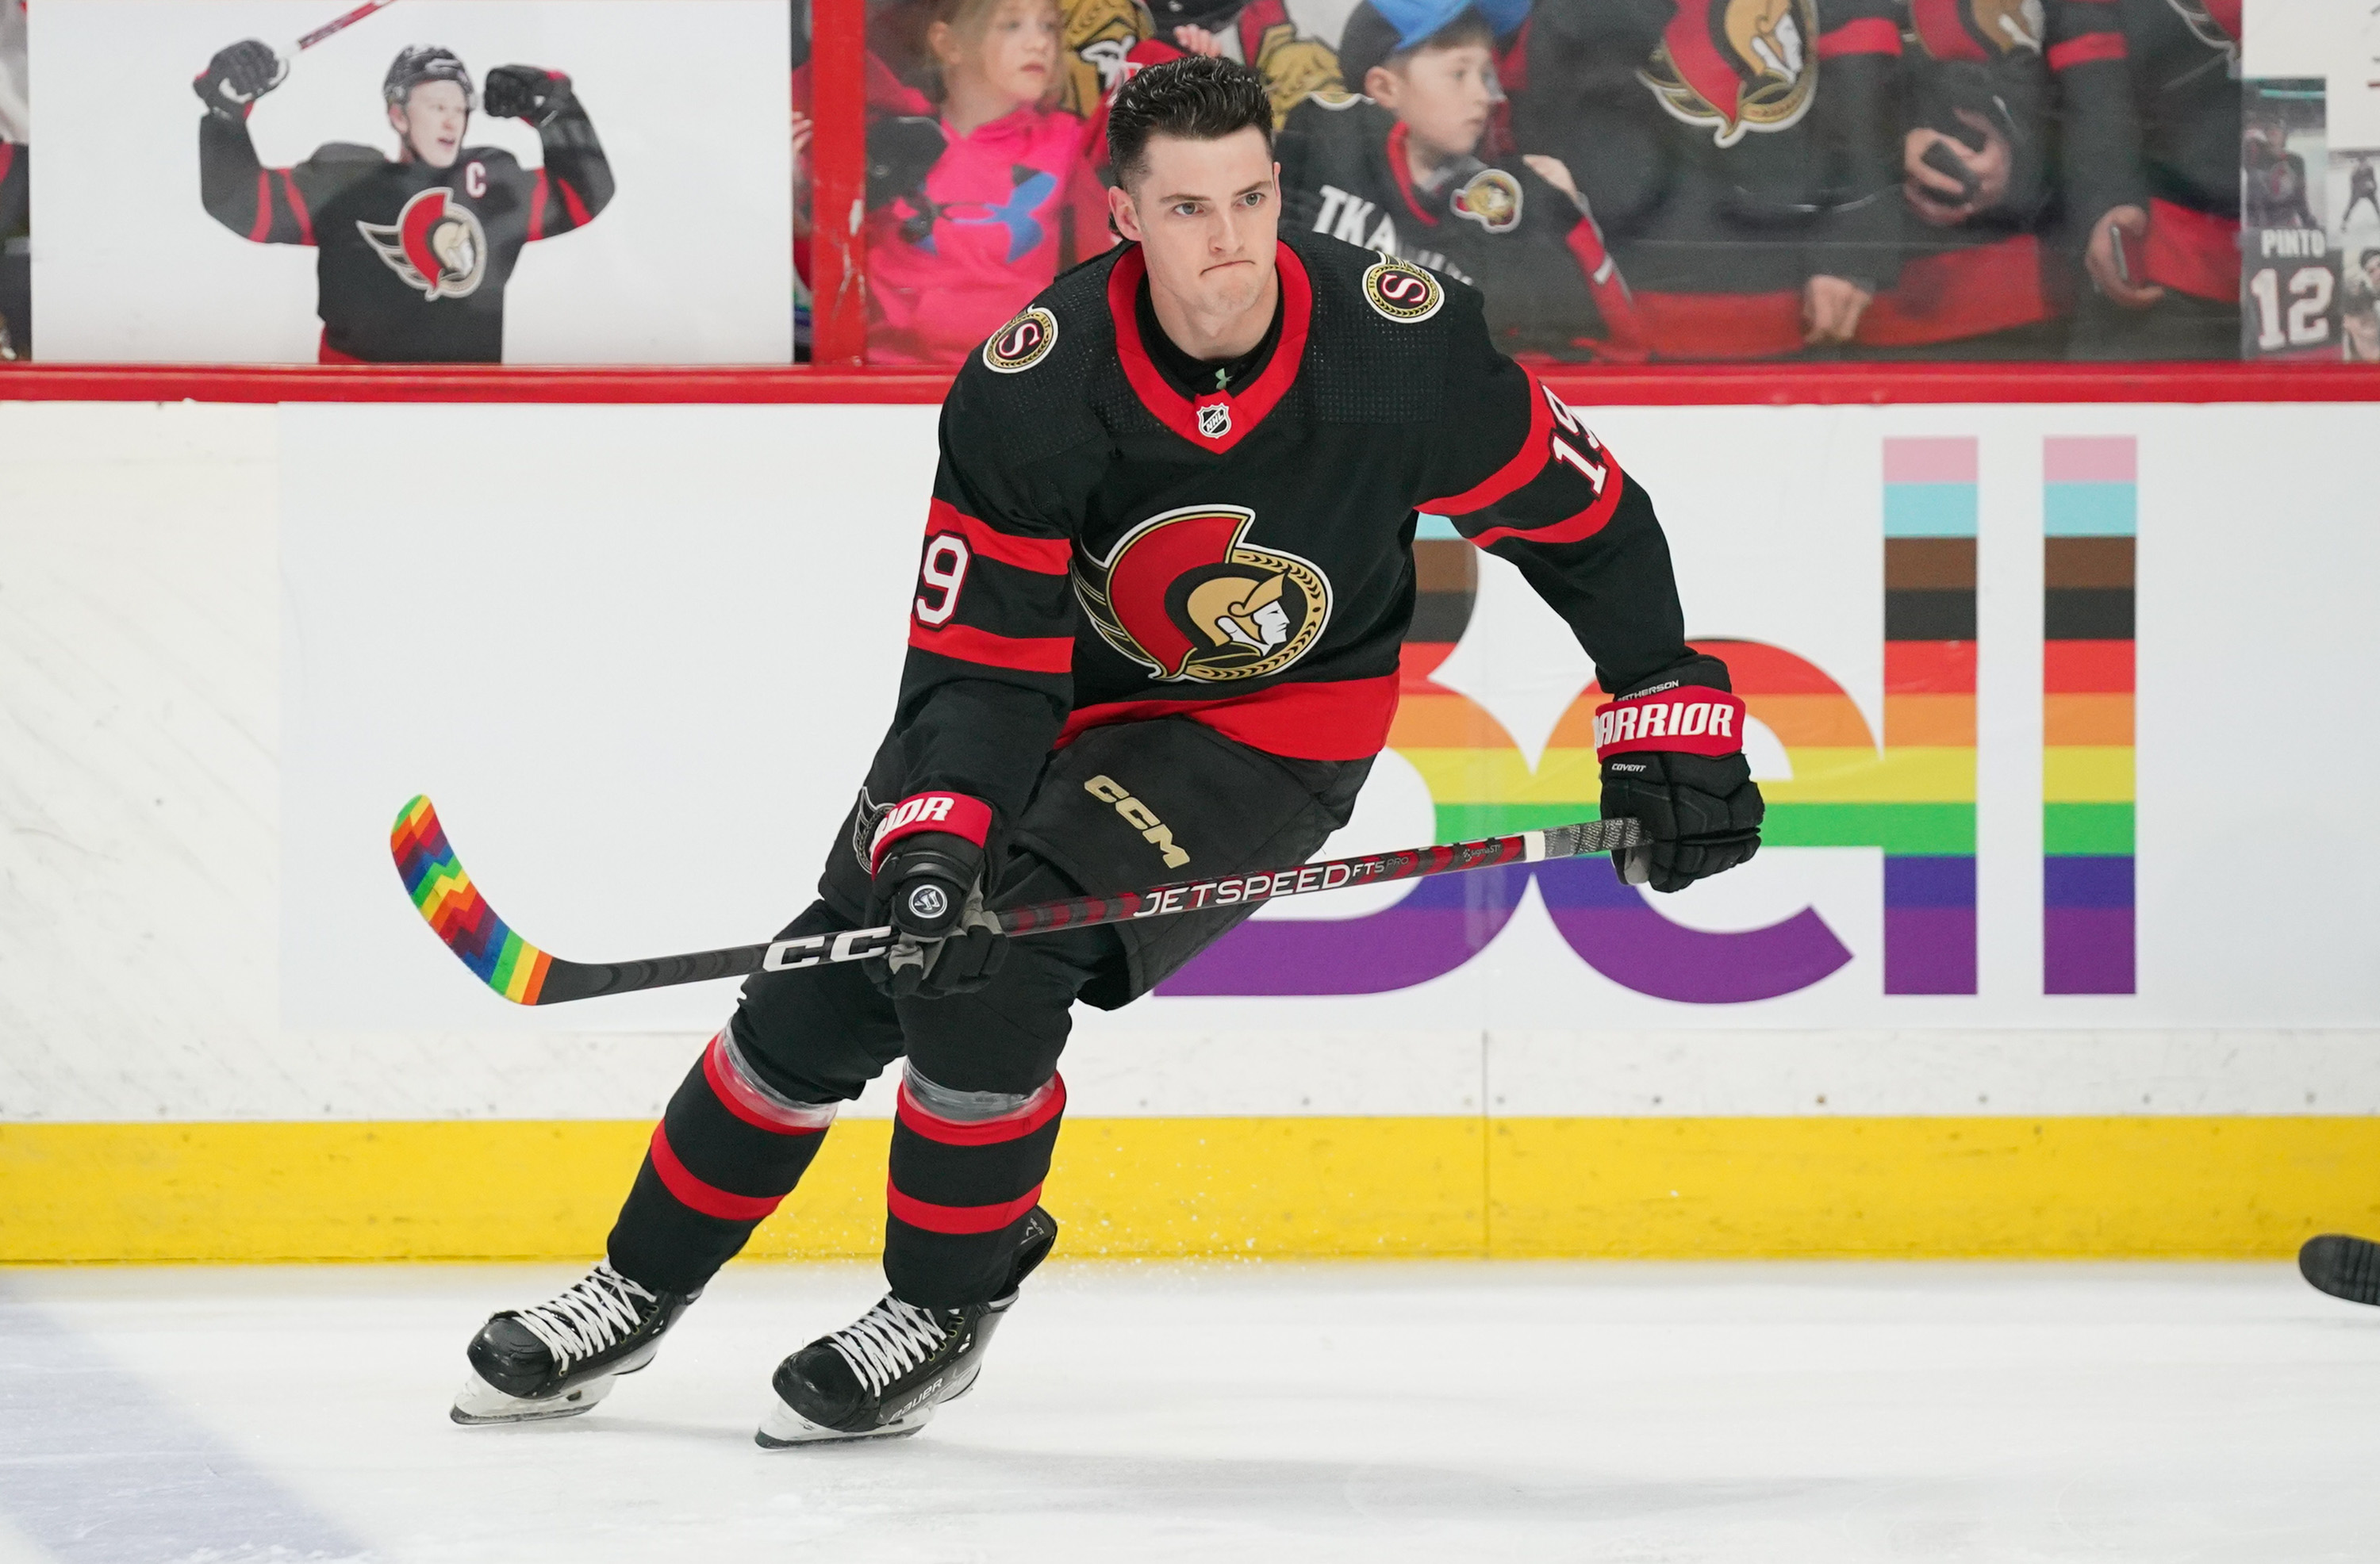 Drake Batherson of the Ottawa Senators warms up with Pride Tape on his stick during warmups on Pride Night on March 4 in Ottawa, Canada.